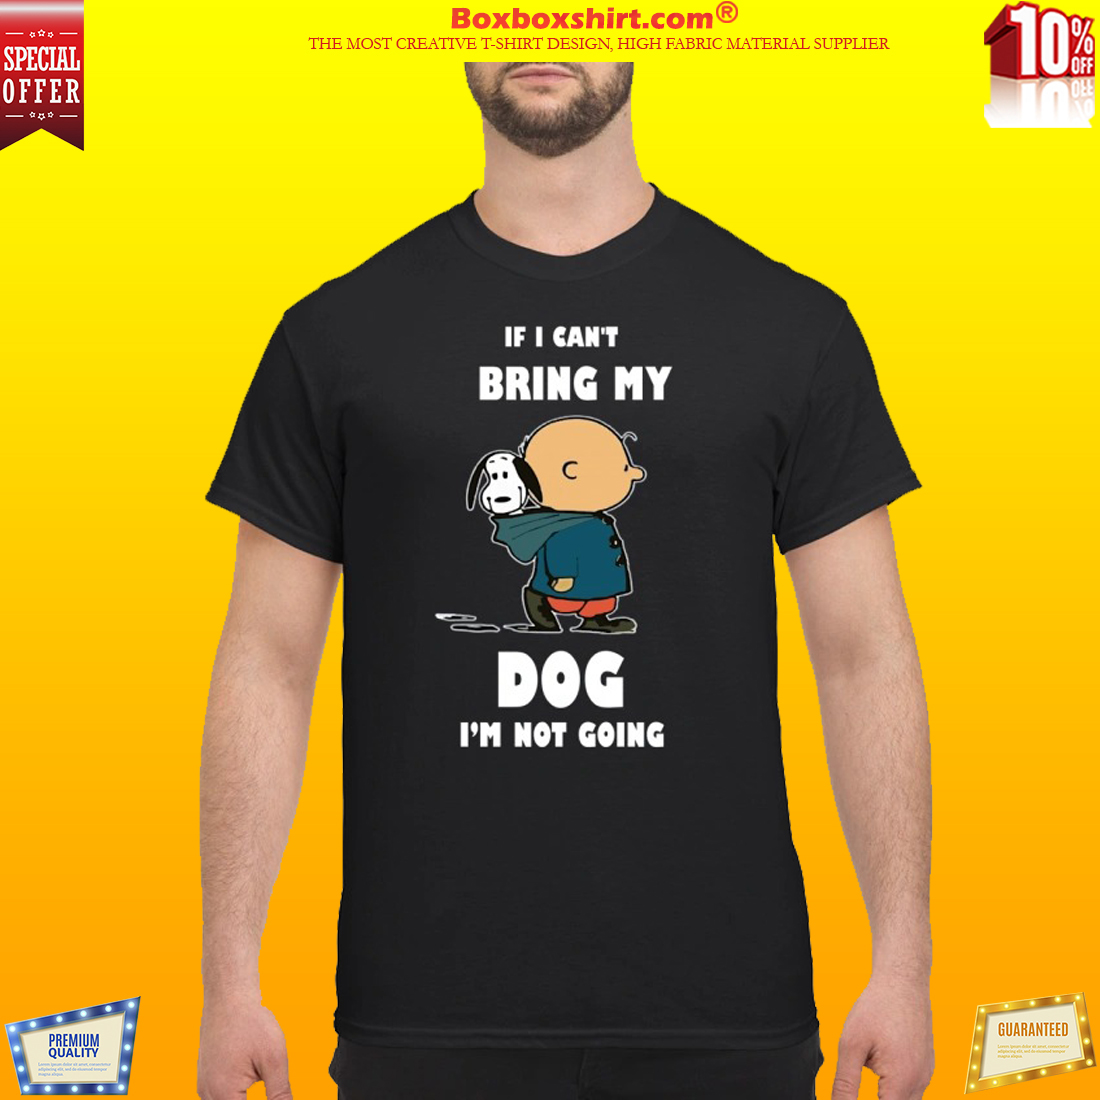 If I can't bring my dog I'm not going shirt